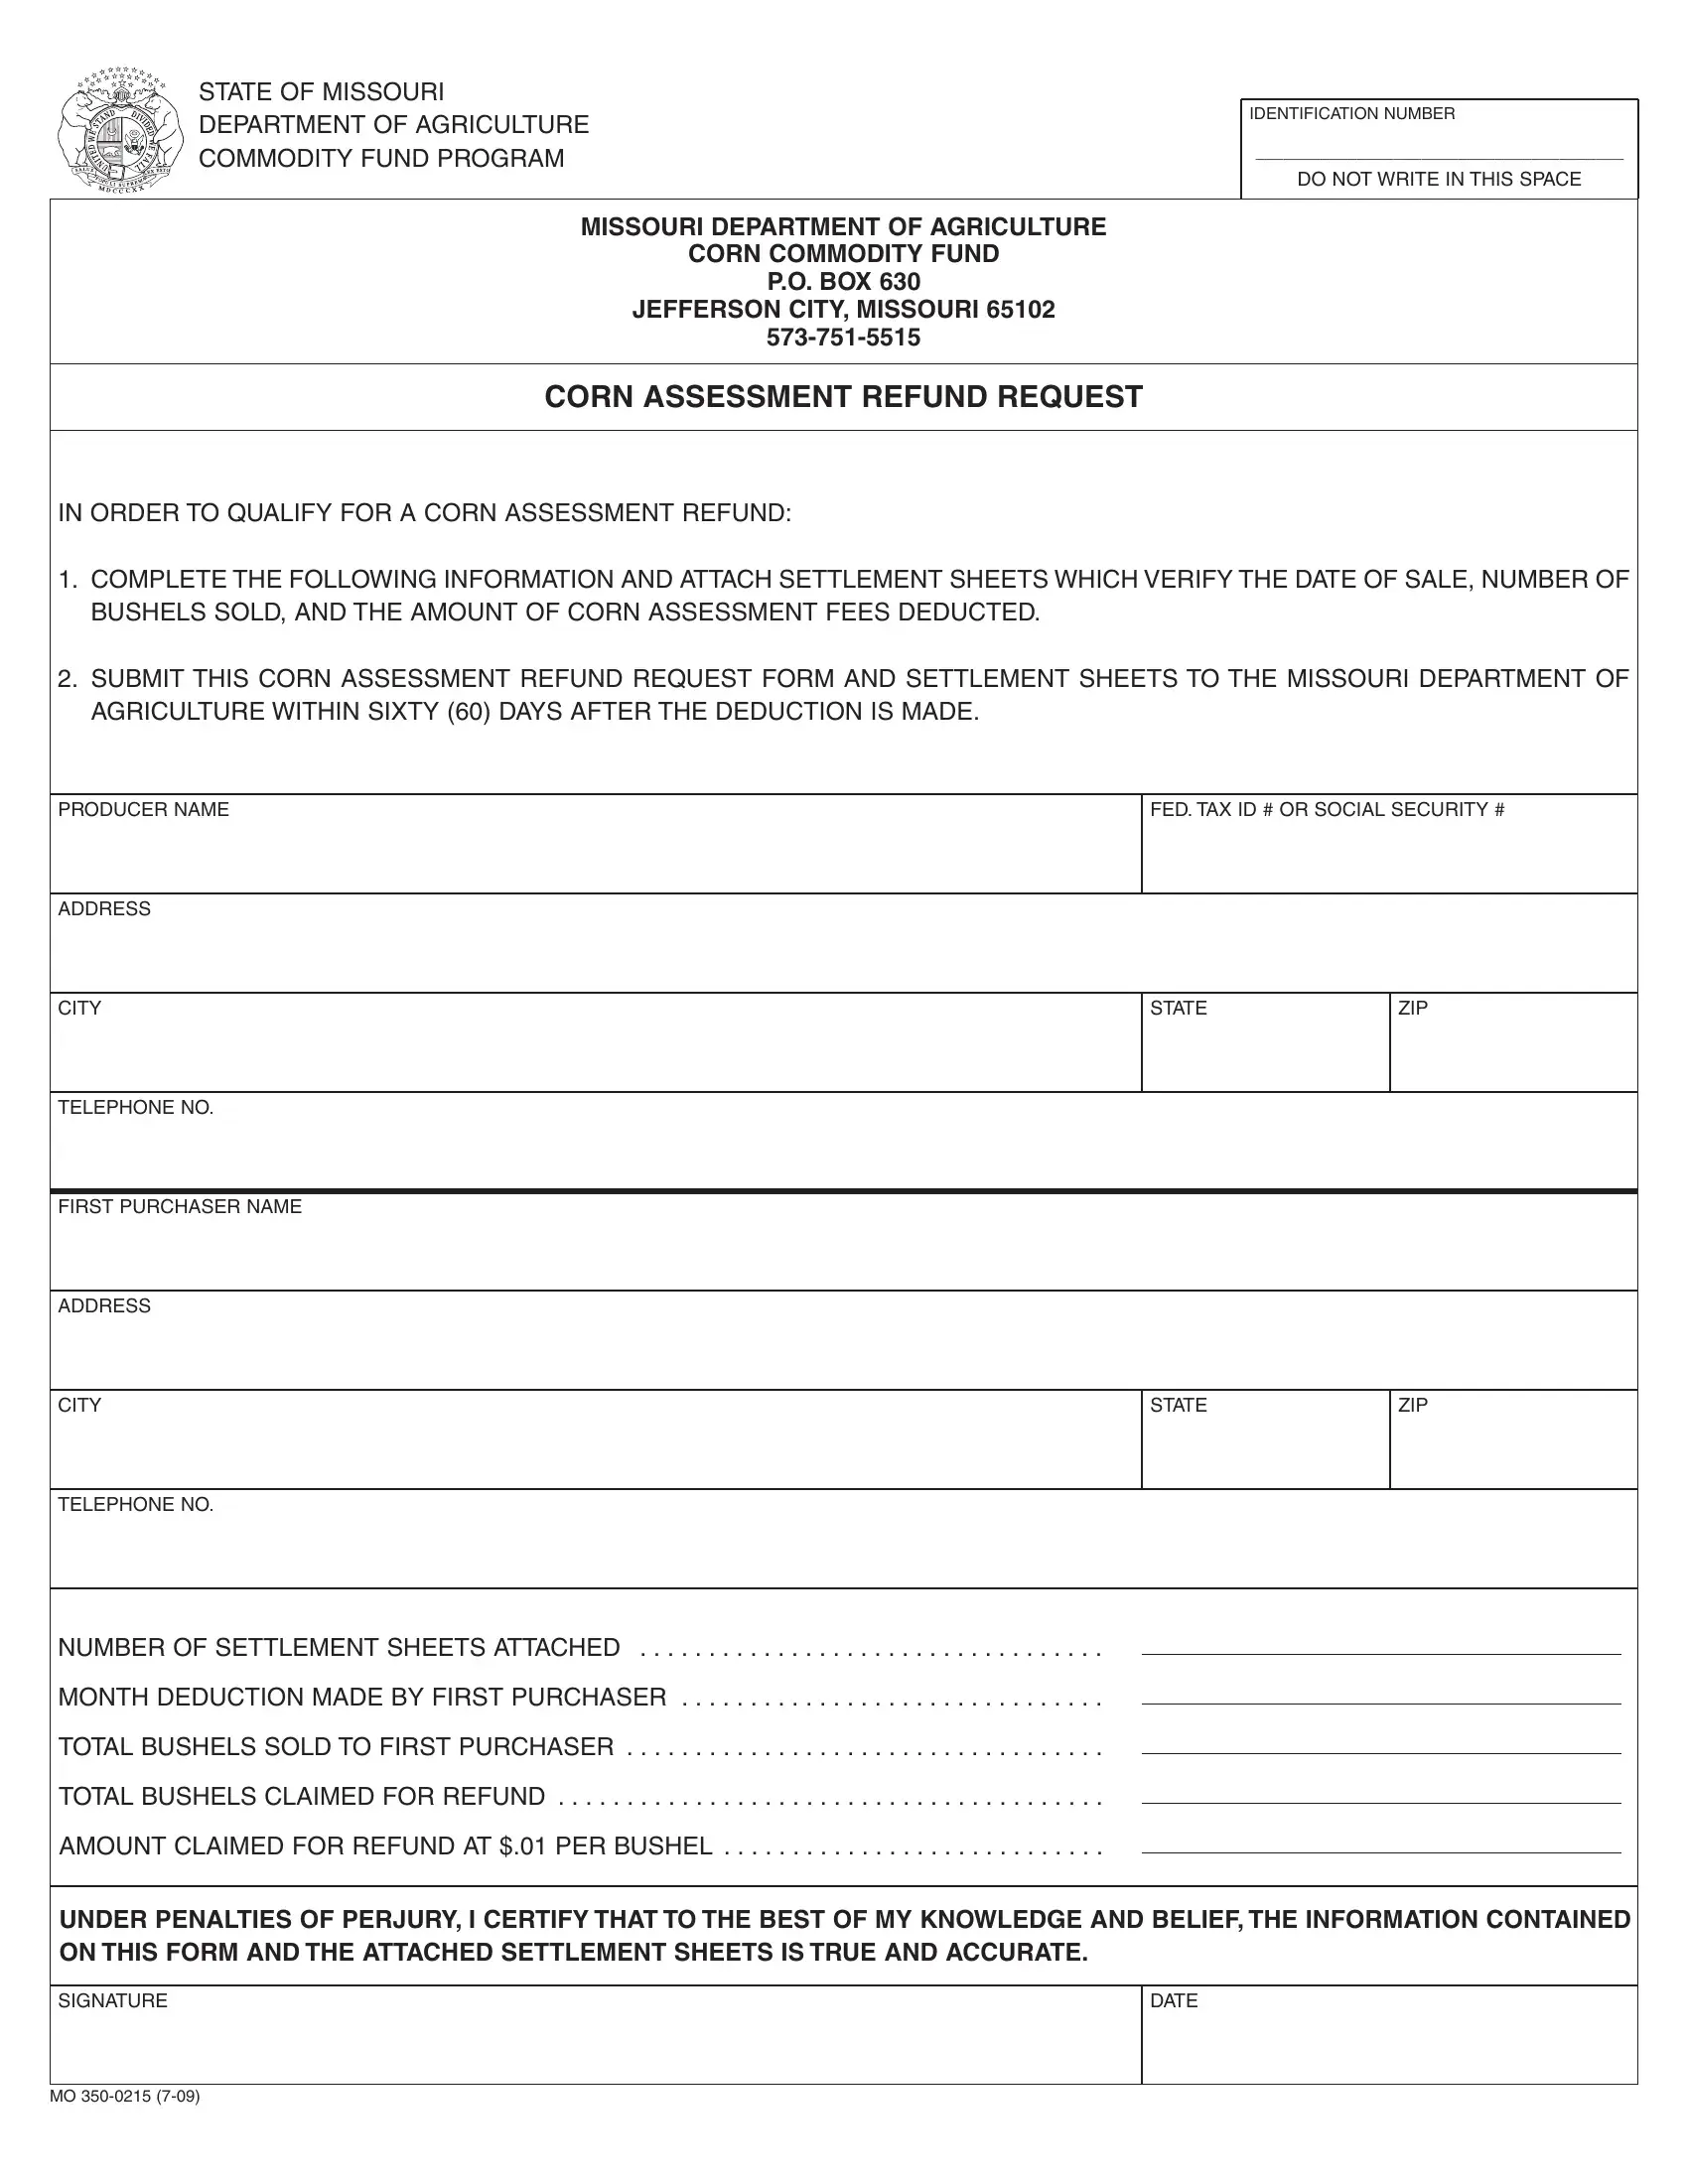 Corn Assessment Refund Request Form Preview